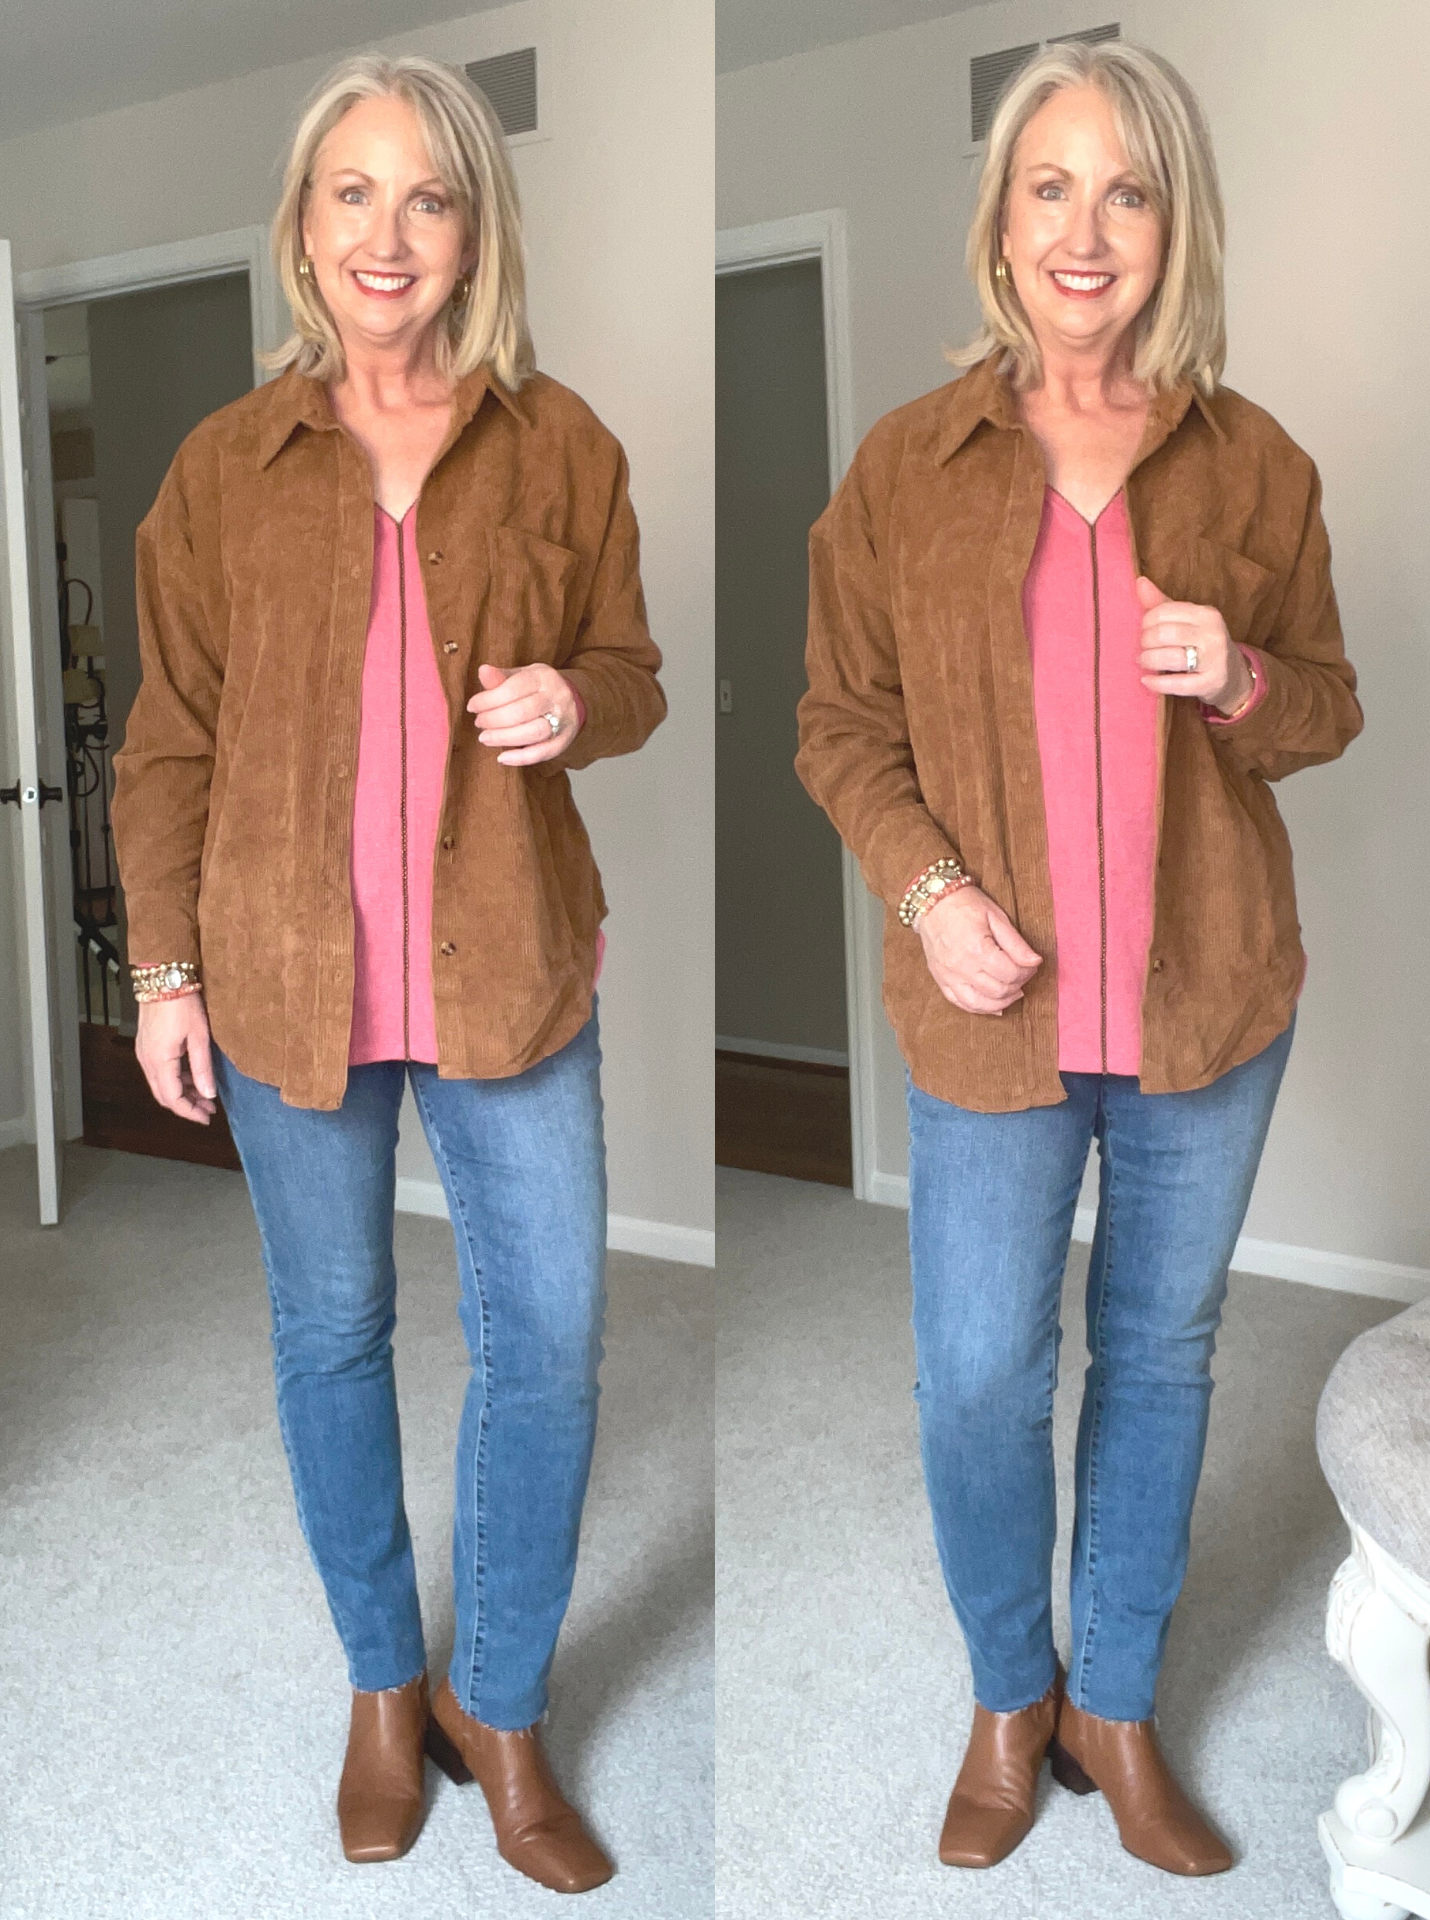 Wear a Shirt Jacket with a Colored top